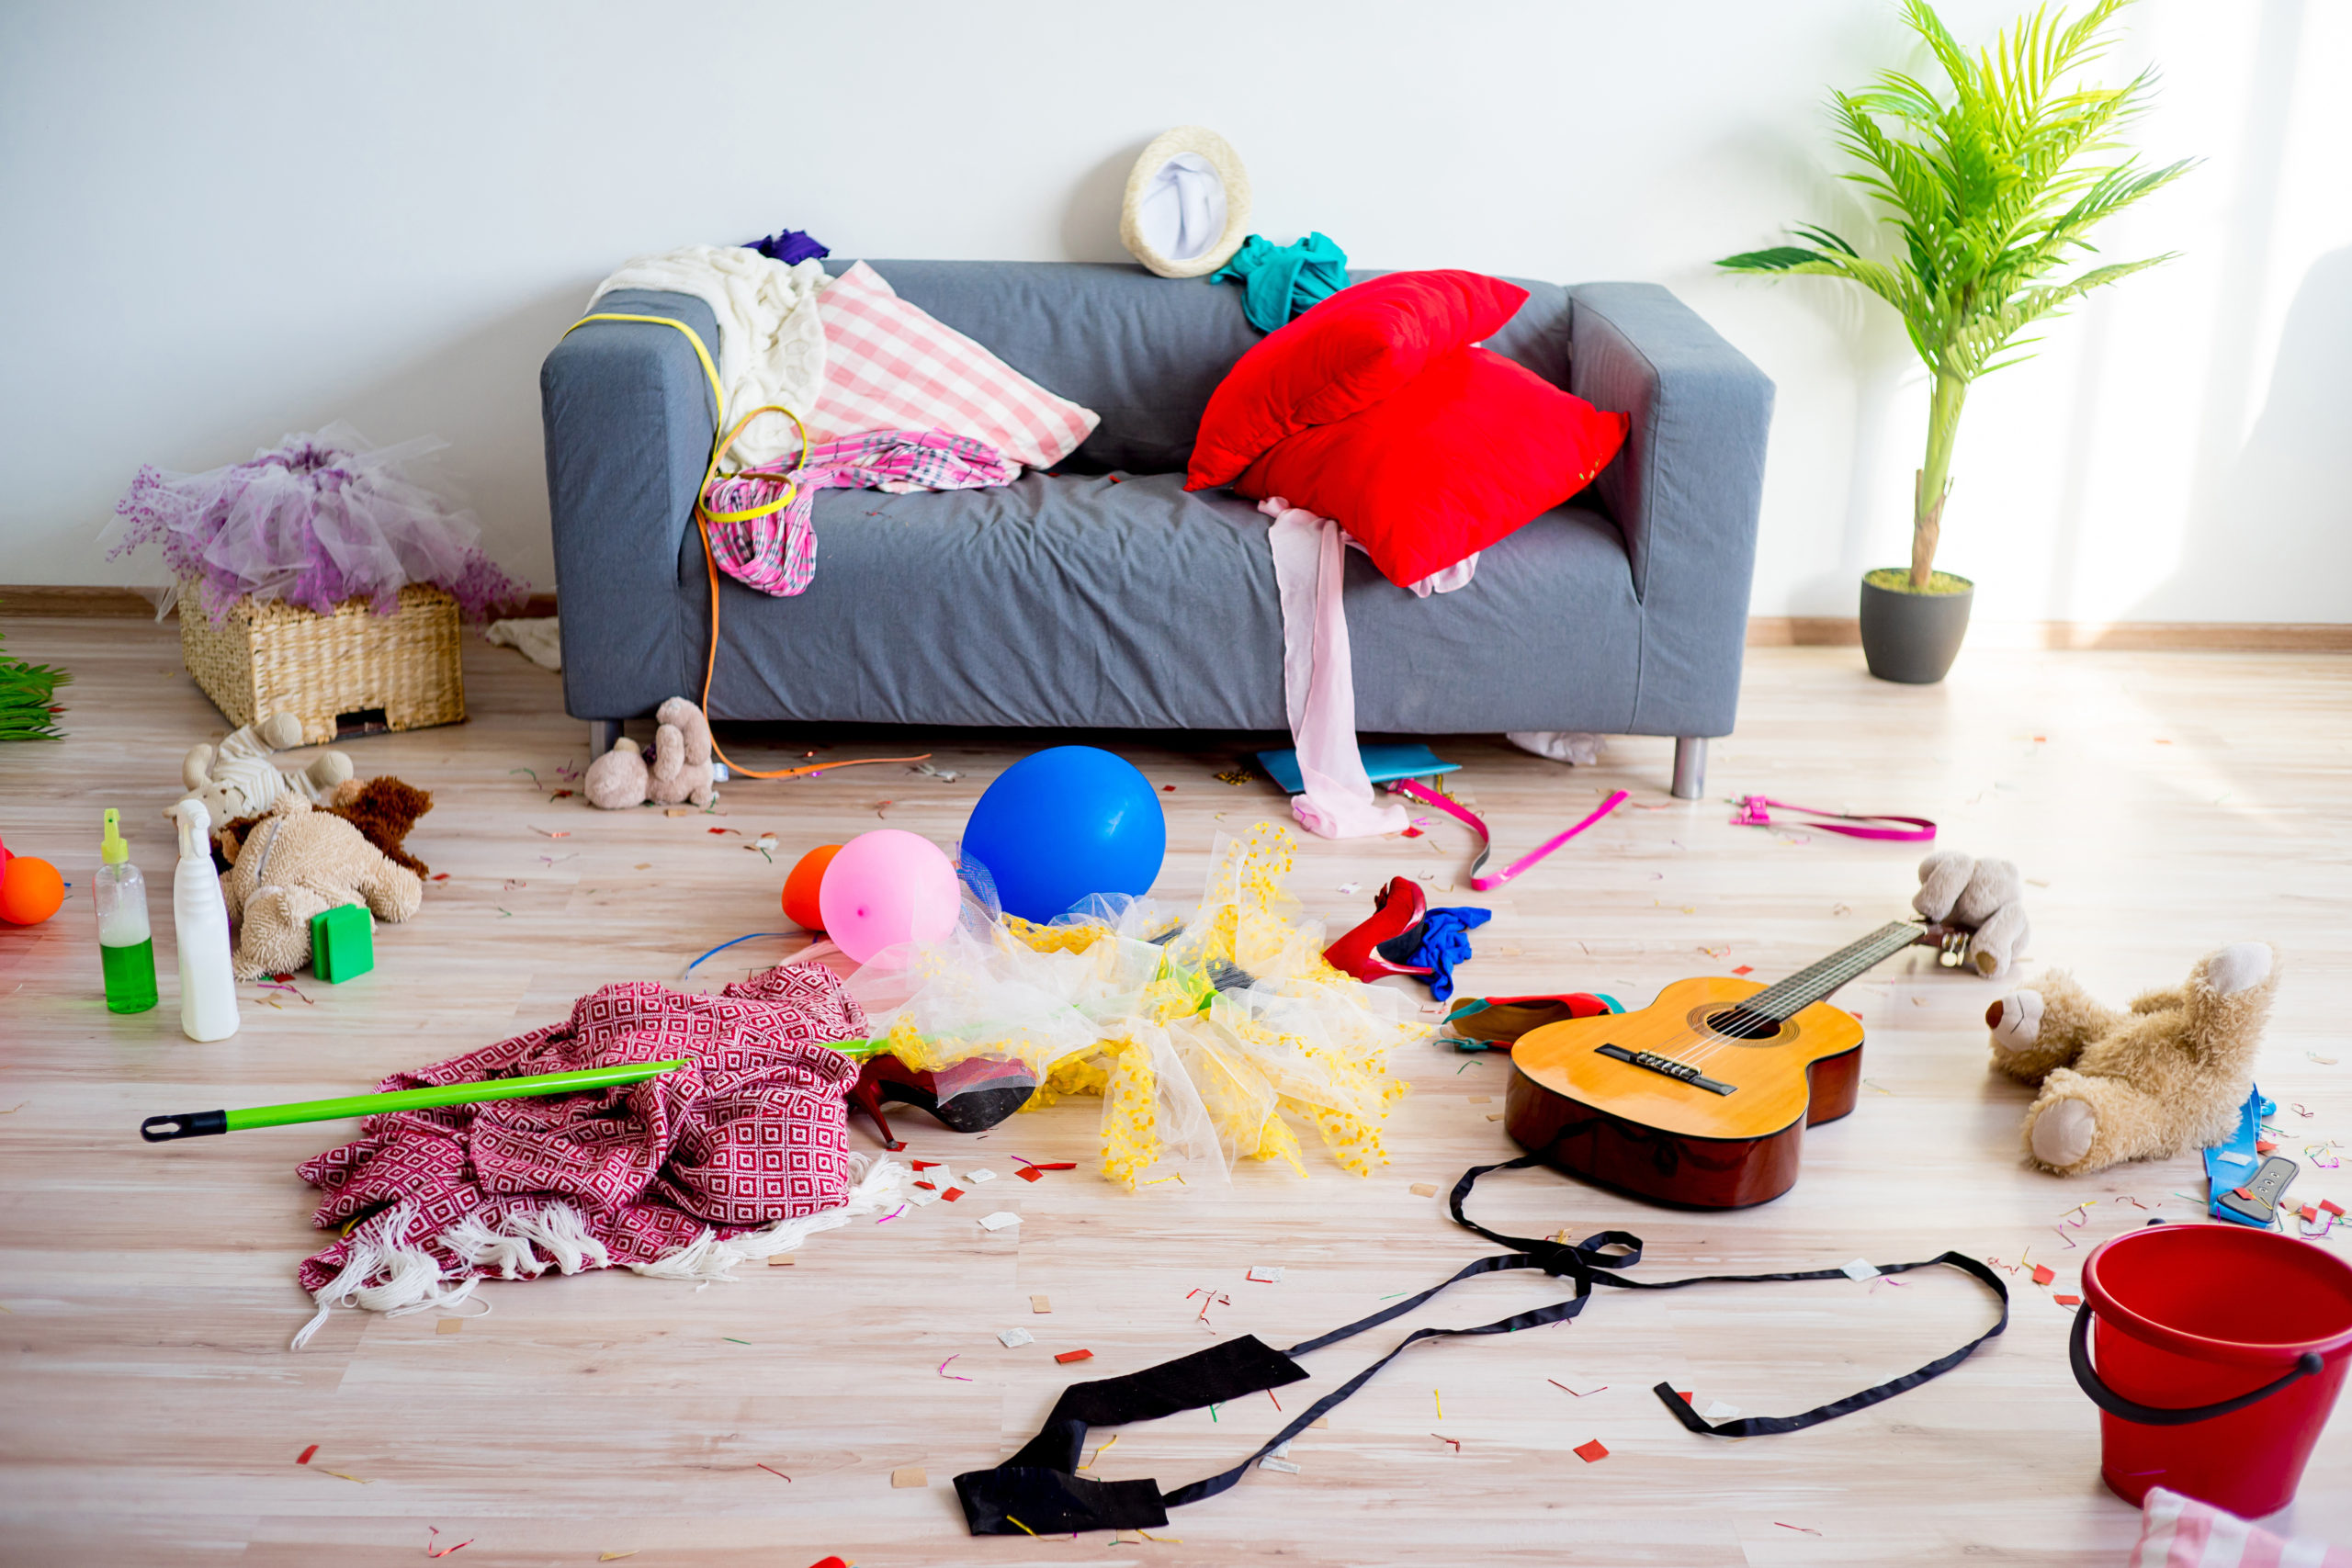 How to Clean a Messy House Fast Like a Total Boss - Toot Sweet 4 Two